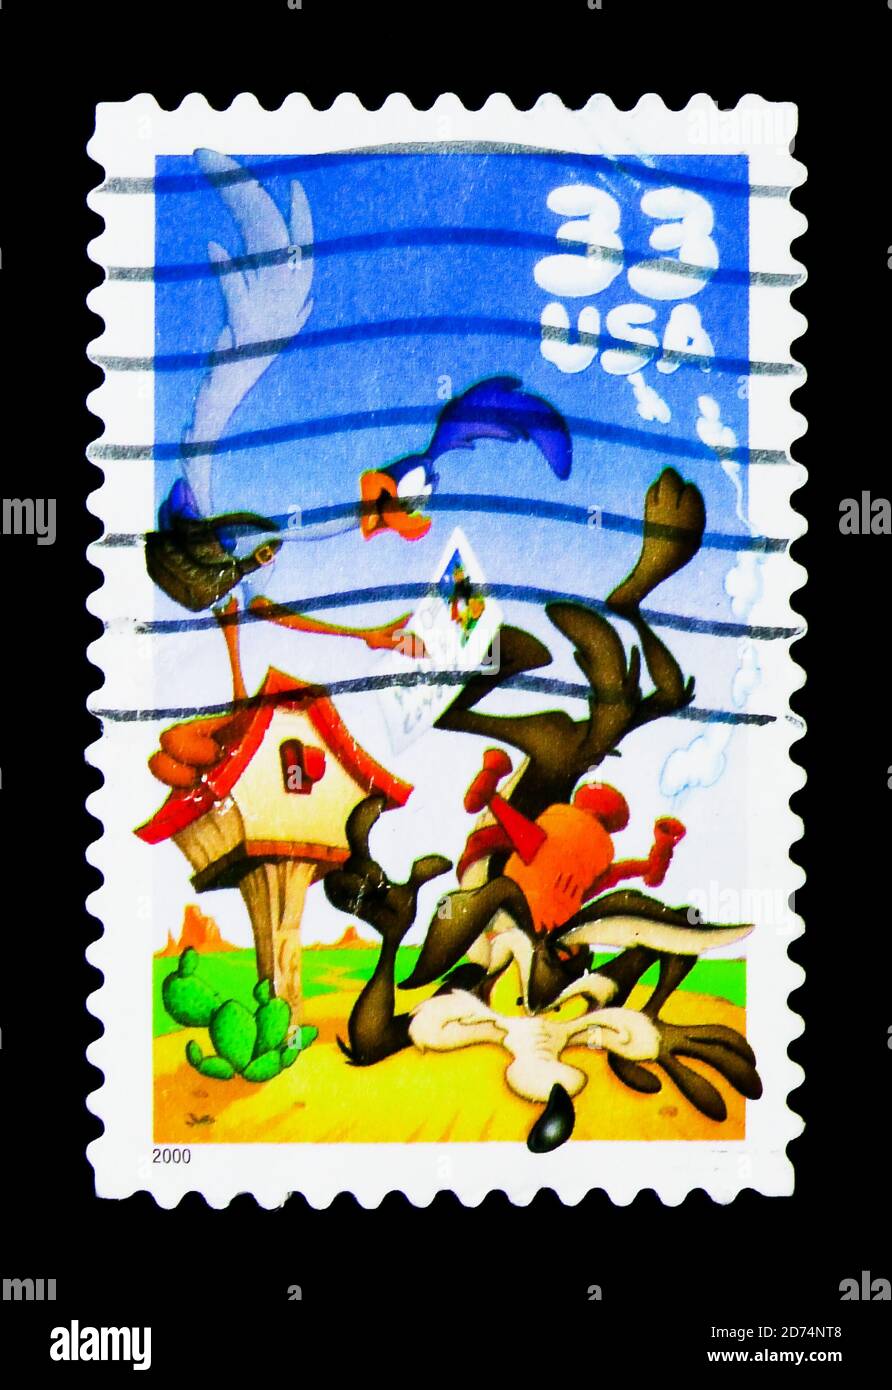 MOSCOW, RUSSIA - NOVEMBER 24, 2017: A stamp printed in USA shows Road Runner and Wile E. Coyote,  Looney Tunes serie, circa 2000 Stock Photo